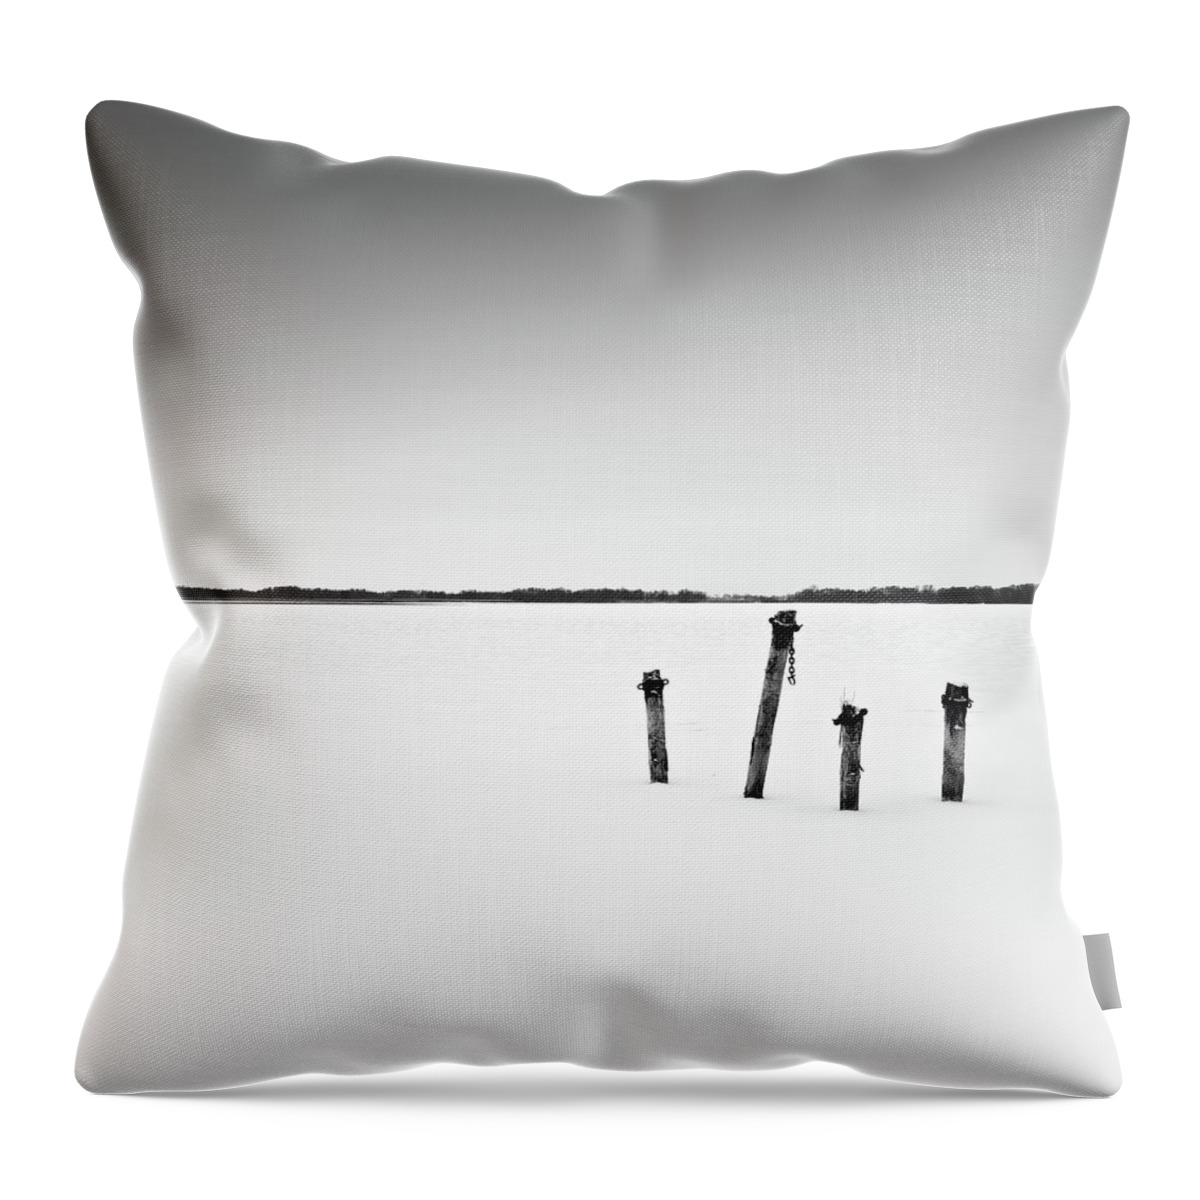 Empty Throw Pillow featuring the photograph Nothingness by April30